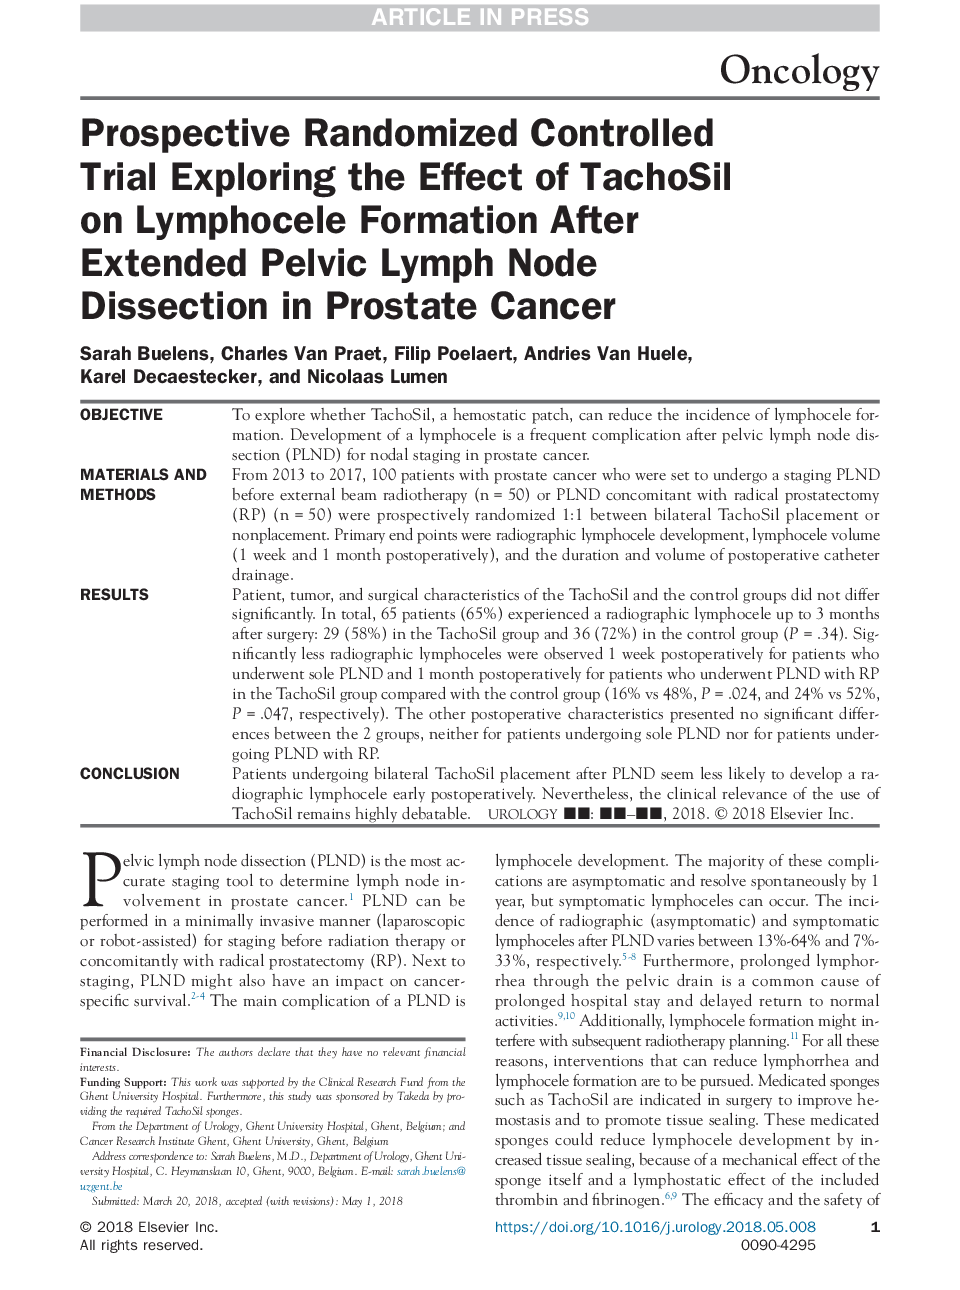 Prospective Randomized Controlled Trial Exploring the Effect of TachoSil on Lymphocele Formation After Extended Pelvic Lymph Node Dissection in Prostate Cancer